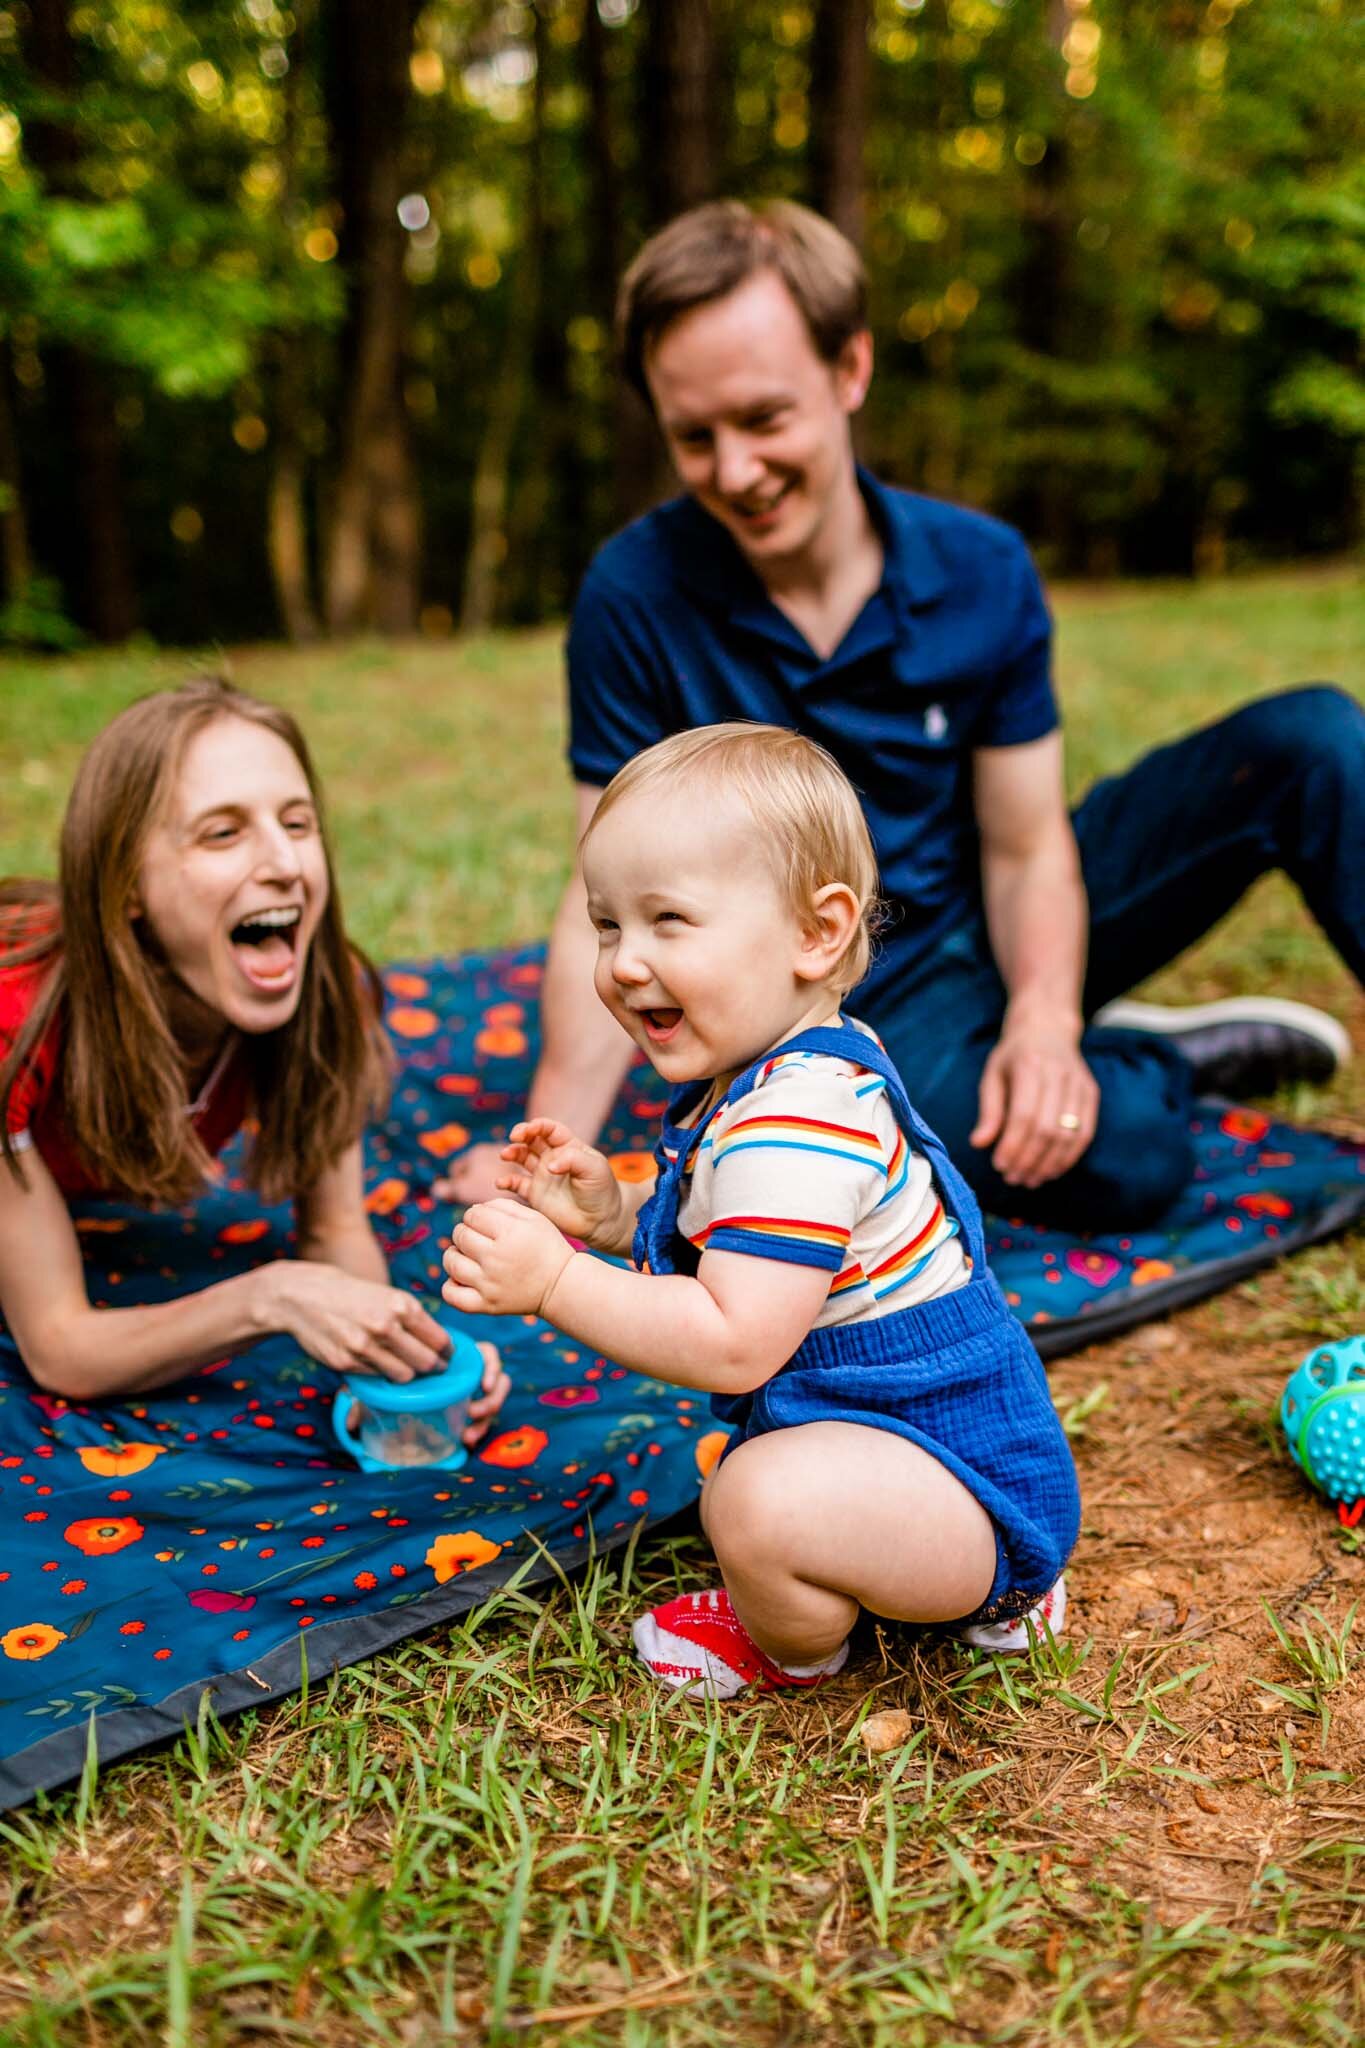 Mother and father laughing with baby boy | Raleigh Family Photographer | Umstead Park | By G. Lin Photography